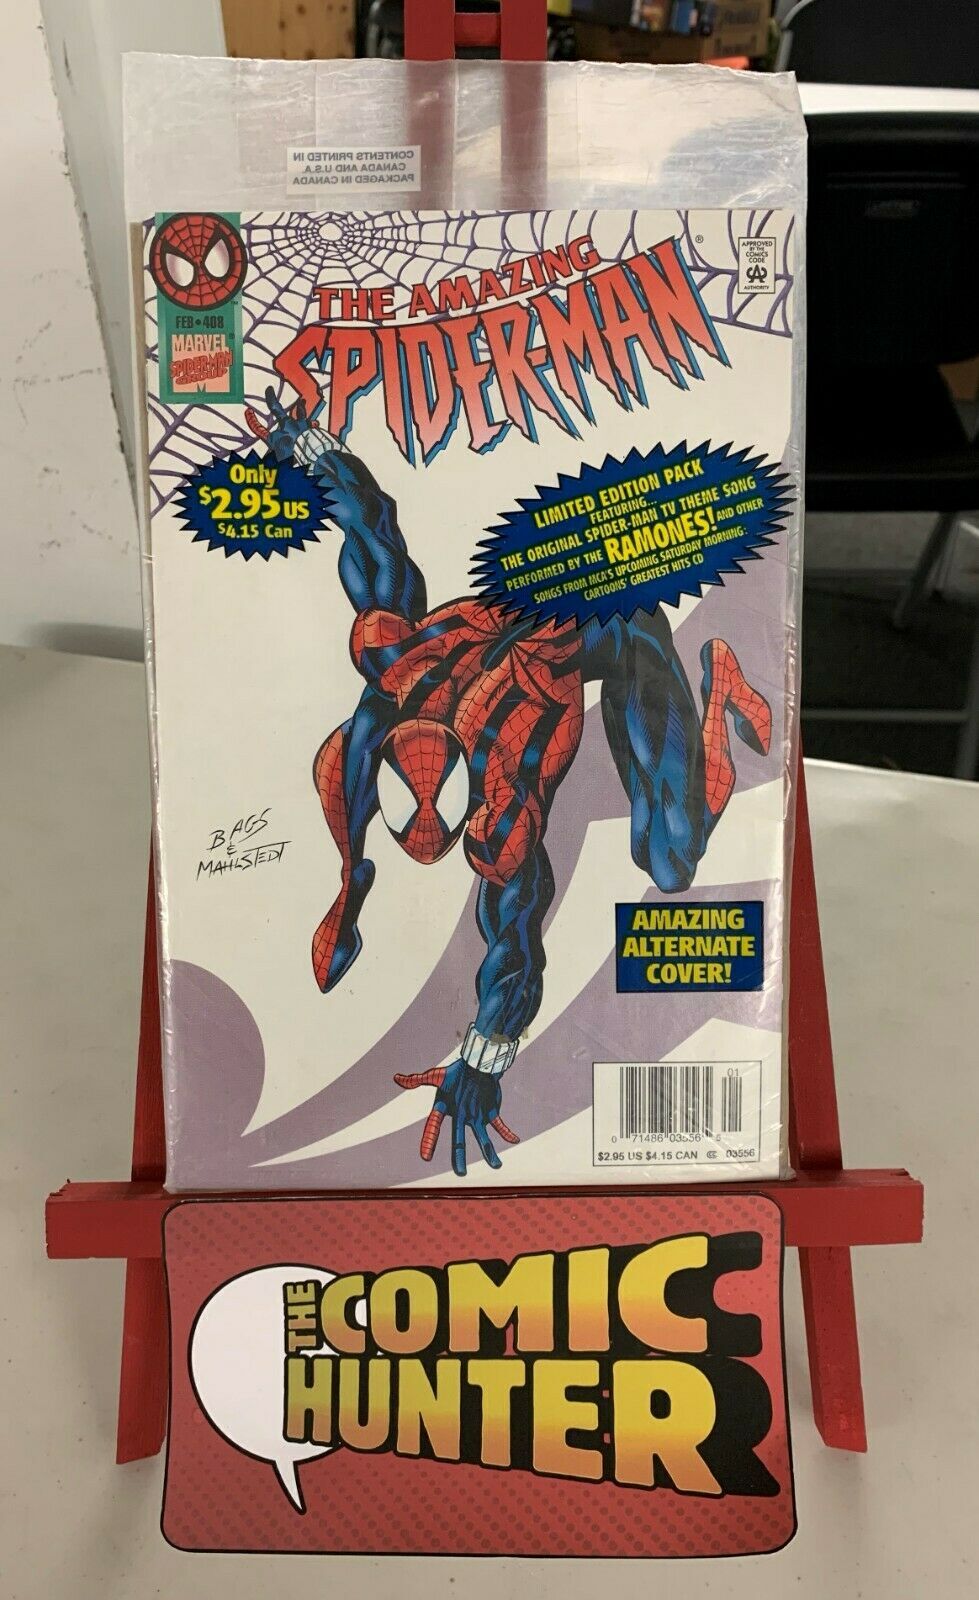 The Amazing Spider-Man #408 Exclusive Variant with Ramones Cassette   SEALED | Comic Books - Modern Age, Marvel, Spider-Man, Superhero / HipComic